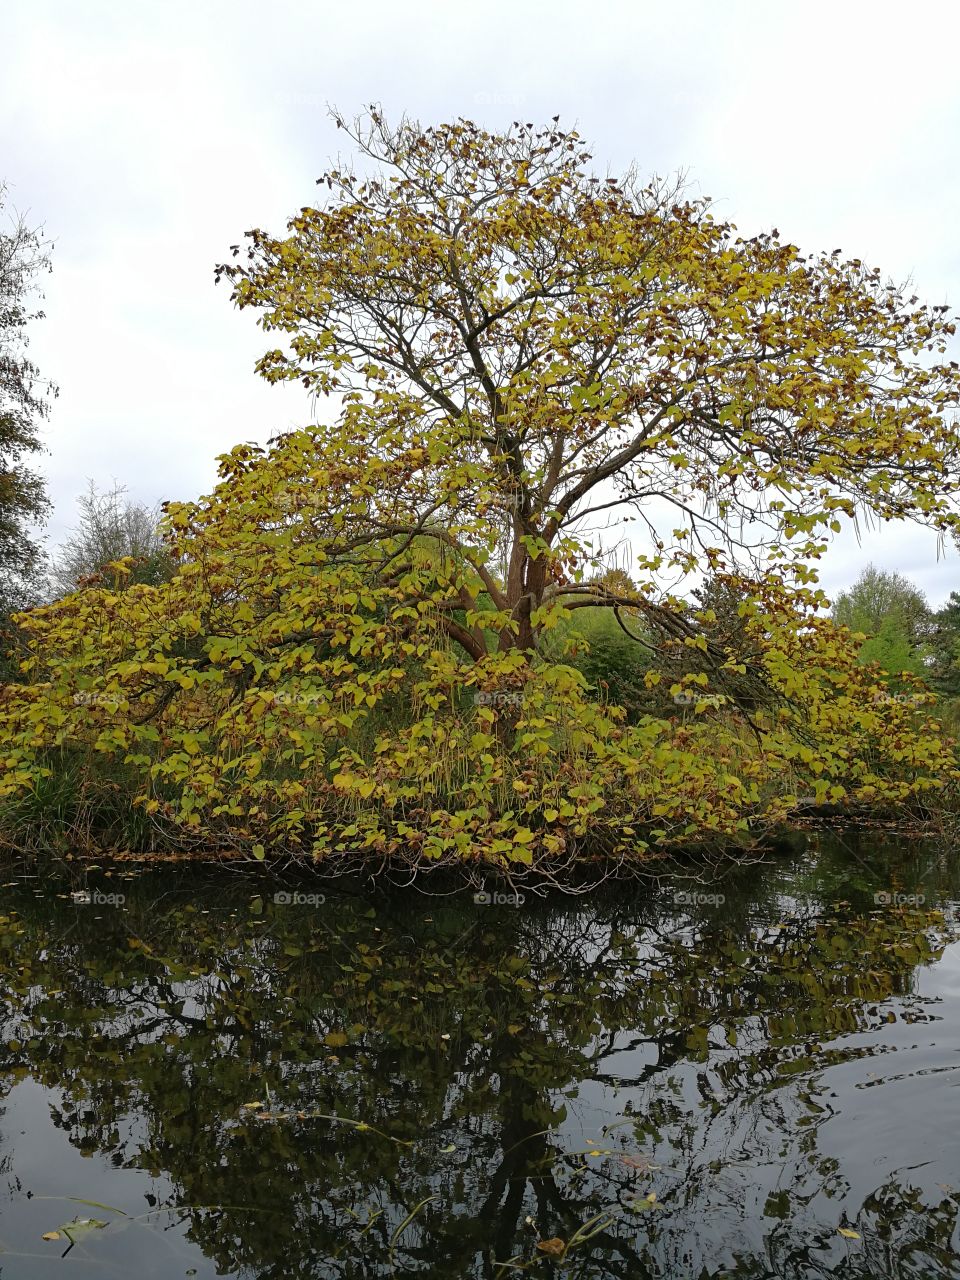 The tree near the water